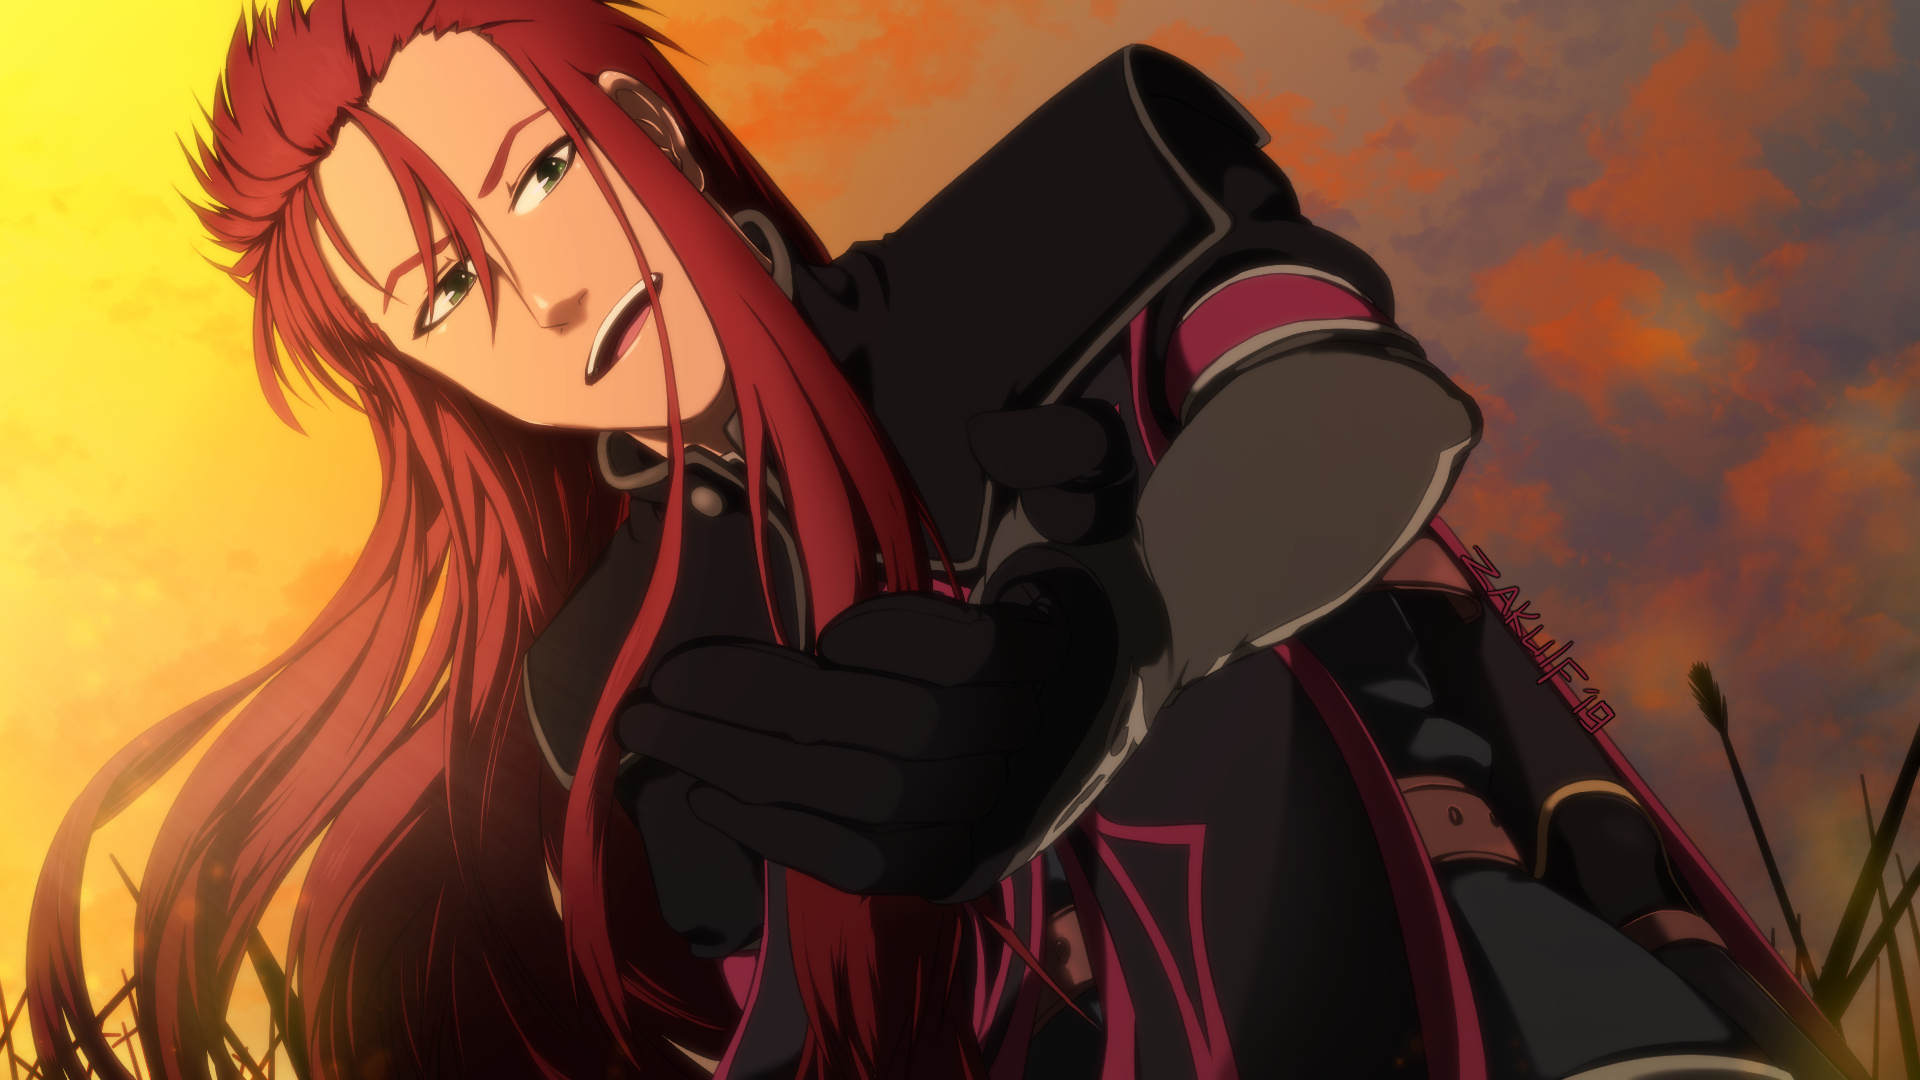 1920x1080 Asch the Bloody Tales of the Abyss Wallpaper #2739498 Zerochan Anime Image Board